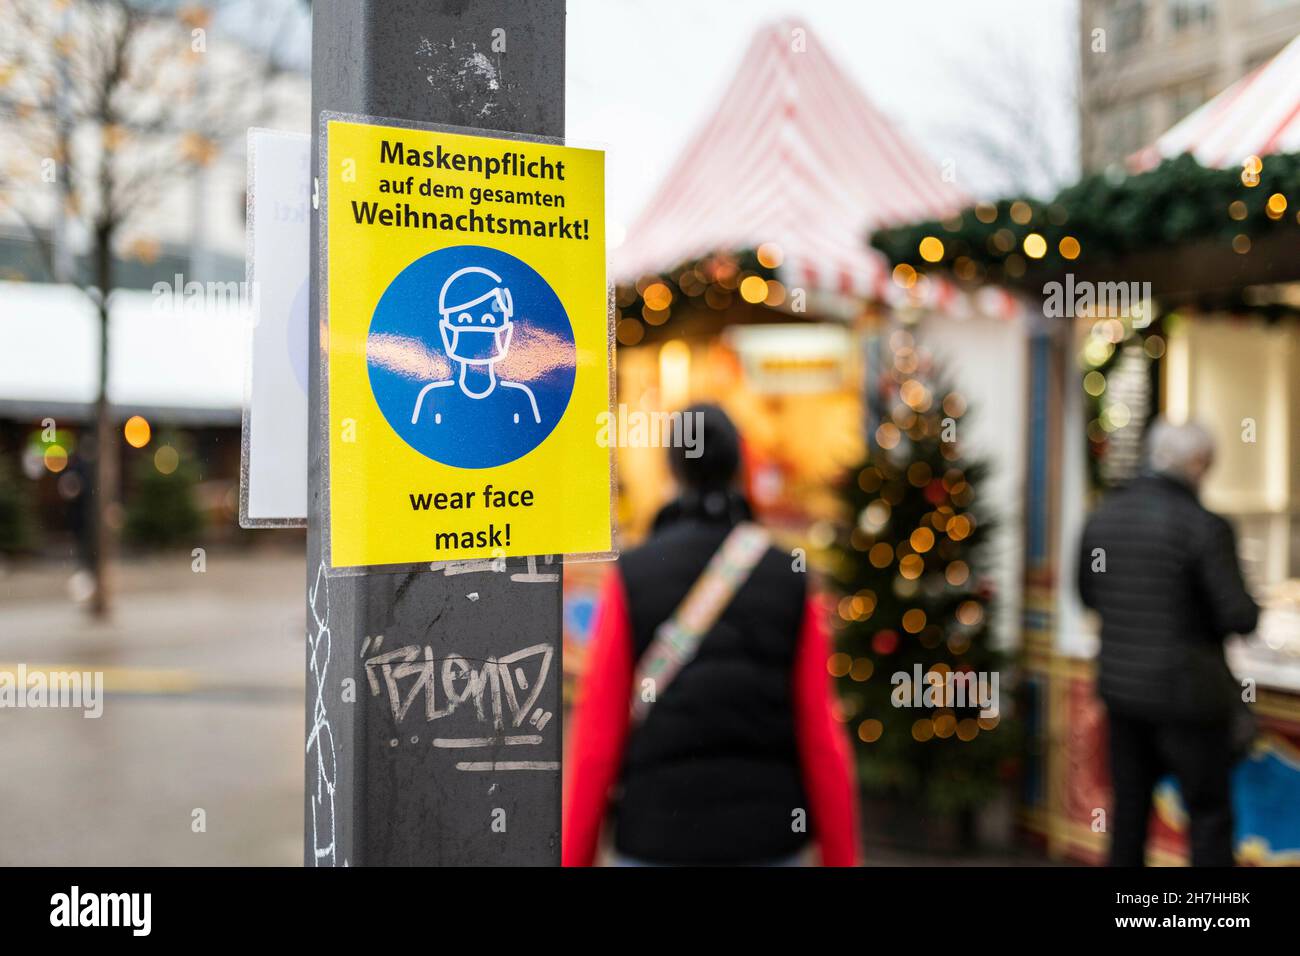 A sign indicating that a mask is required can be seen on the Weihaftertsmarkt on Alexanderplatz in Berlin, November 23, 2021. Copyright: Florian Gaertner/photothek.de Stock Photo